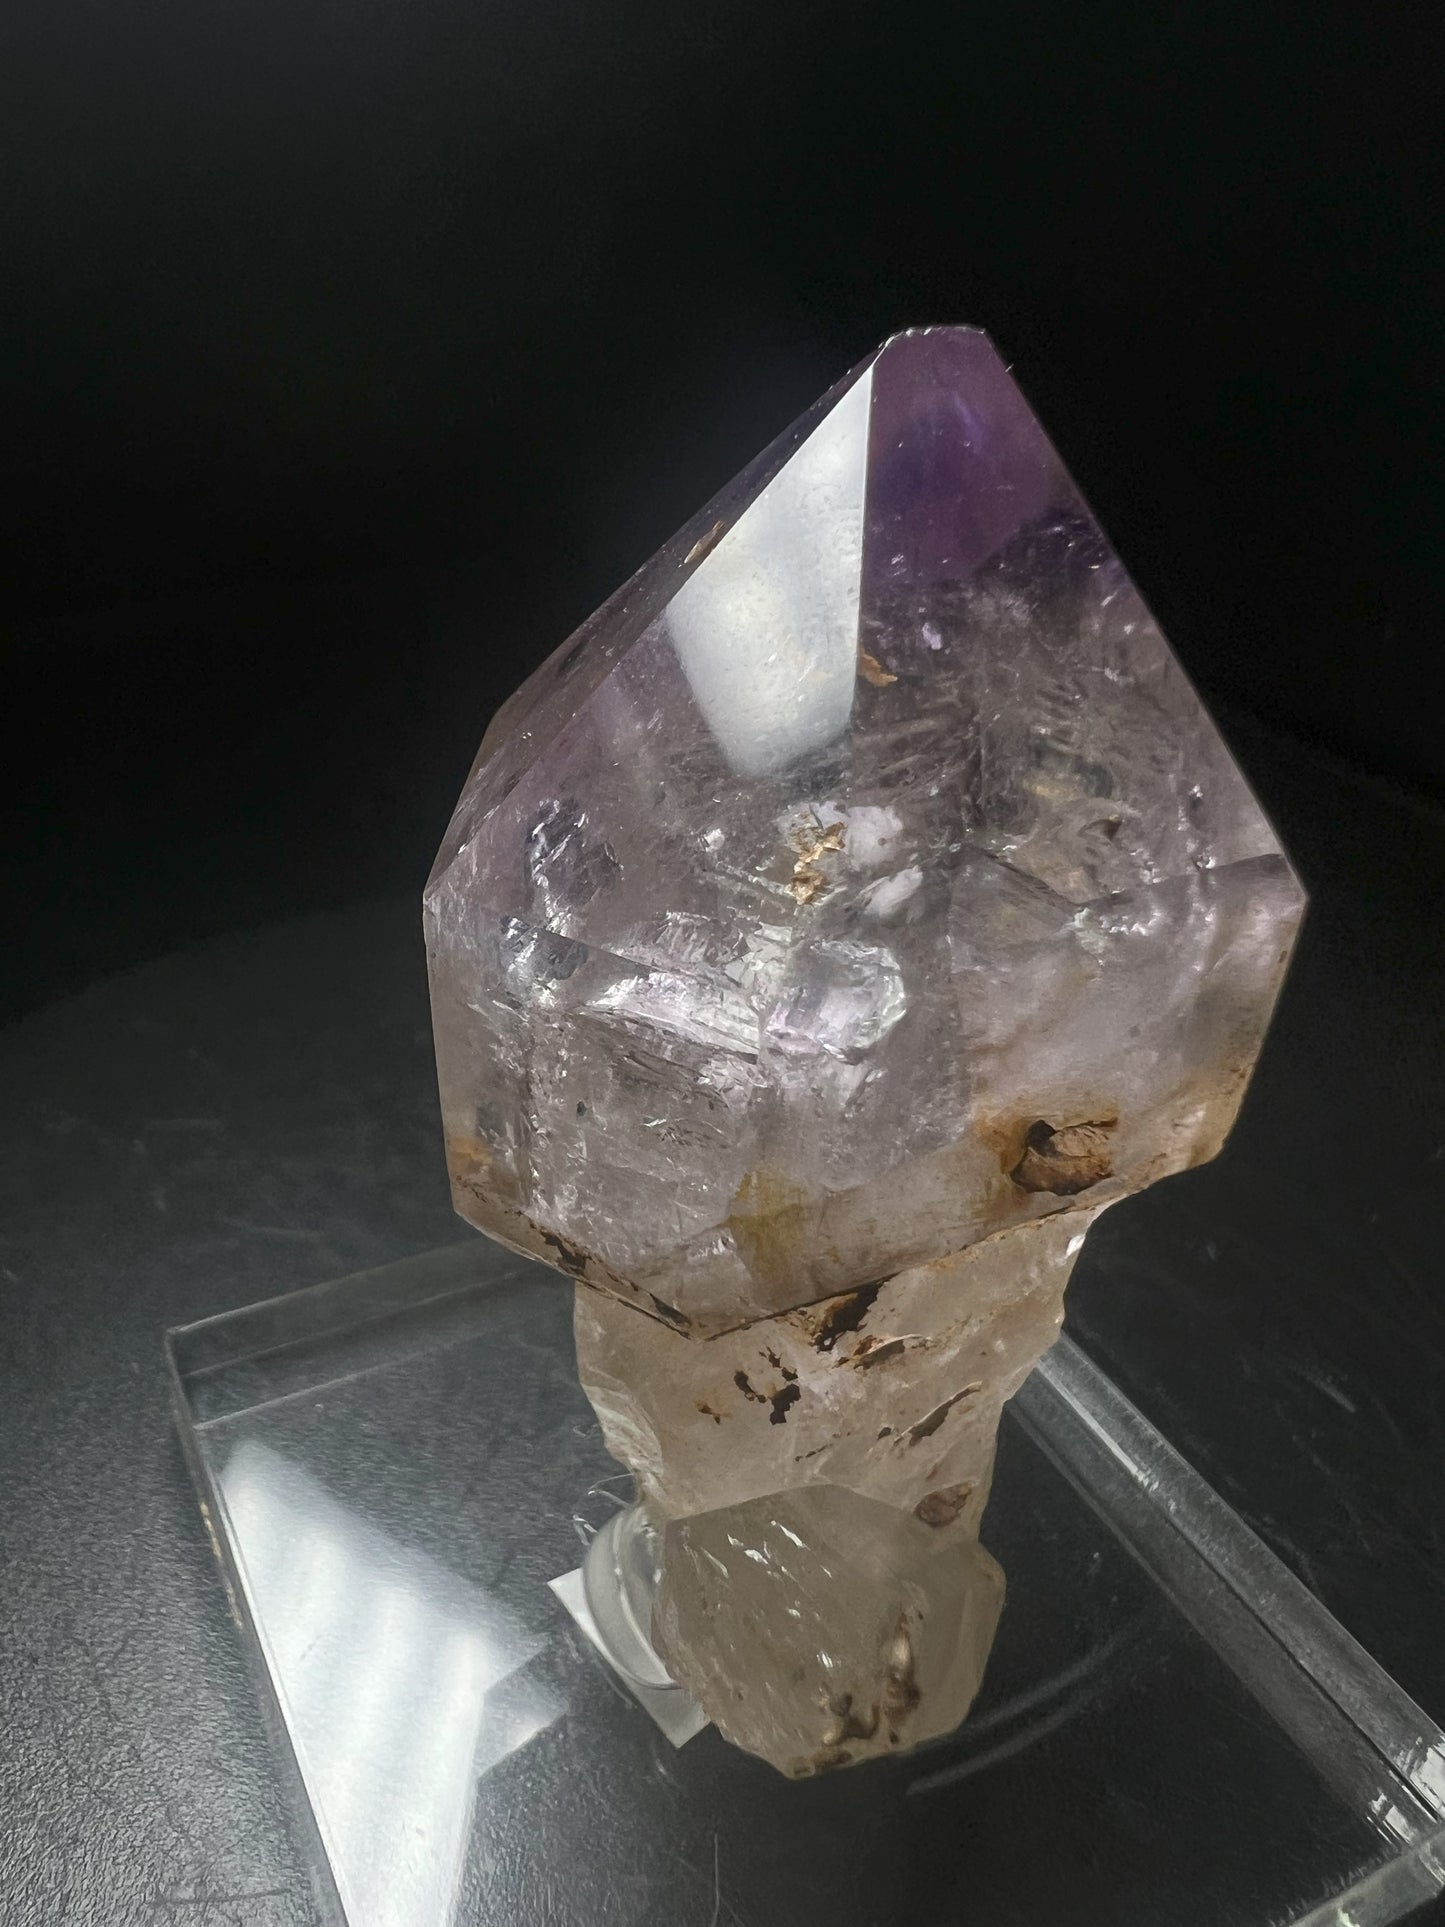 Rare Natural Exceptional Elestial Amethyst Sceptre from Madagascar Collectors Piece Statement Piece Home decor